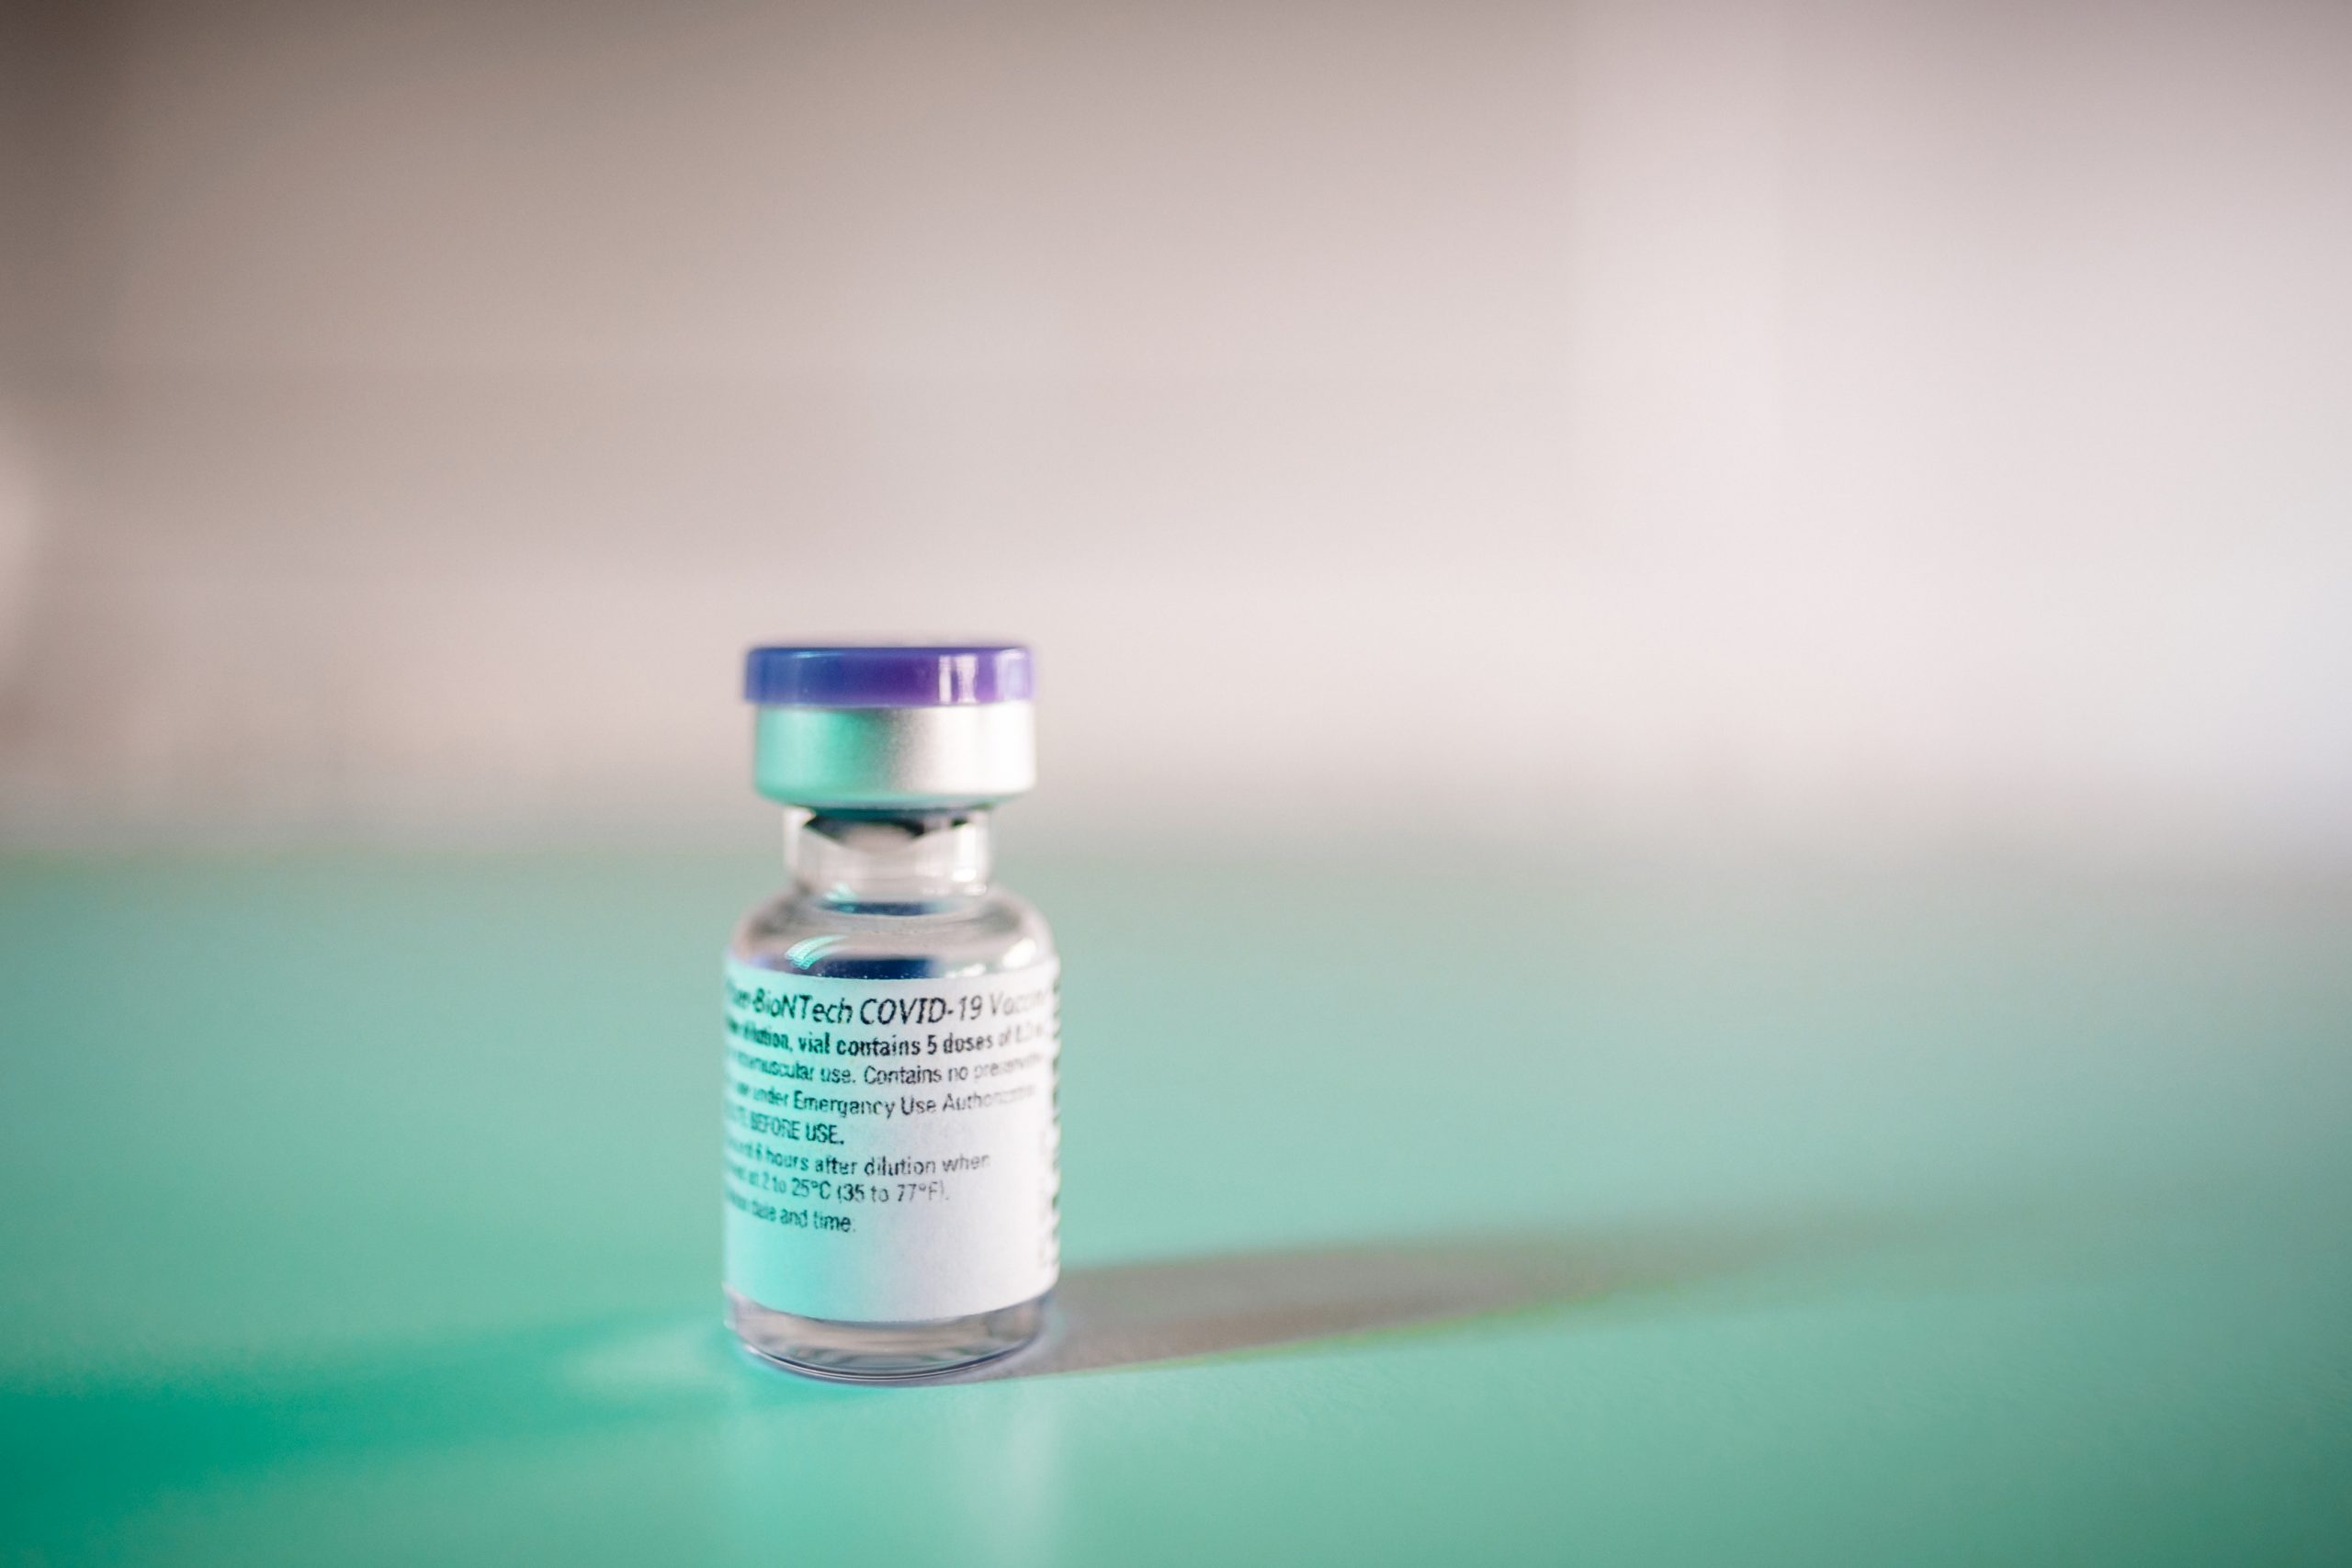 COVID-19 vaccine causes anaphylaxis for 1 Alabama patient: ADPH